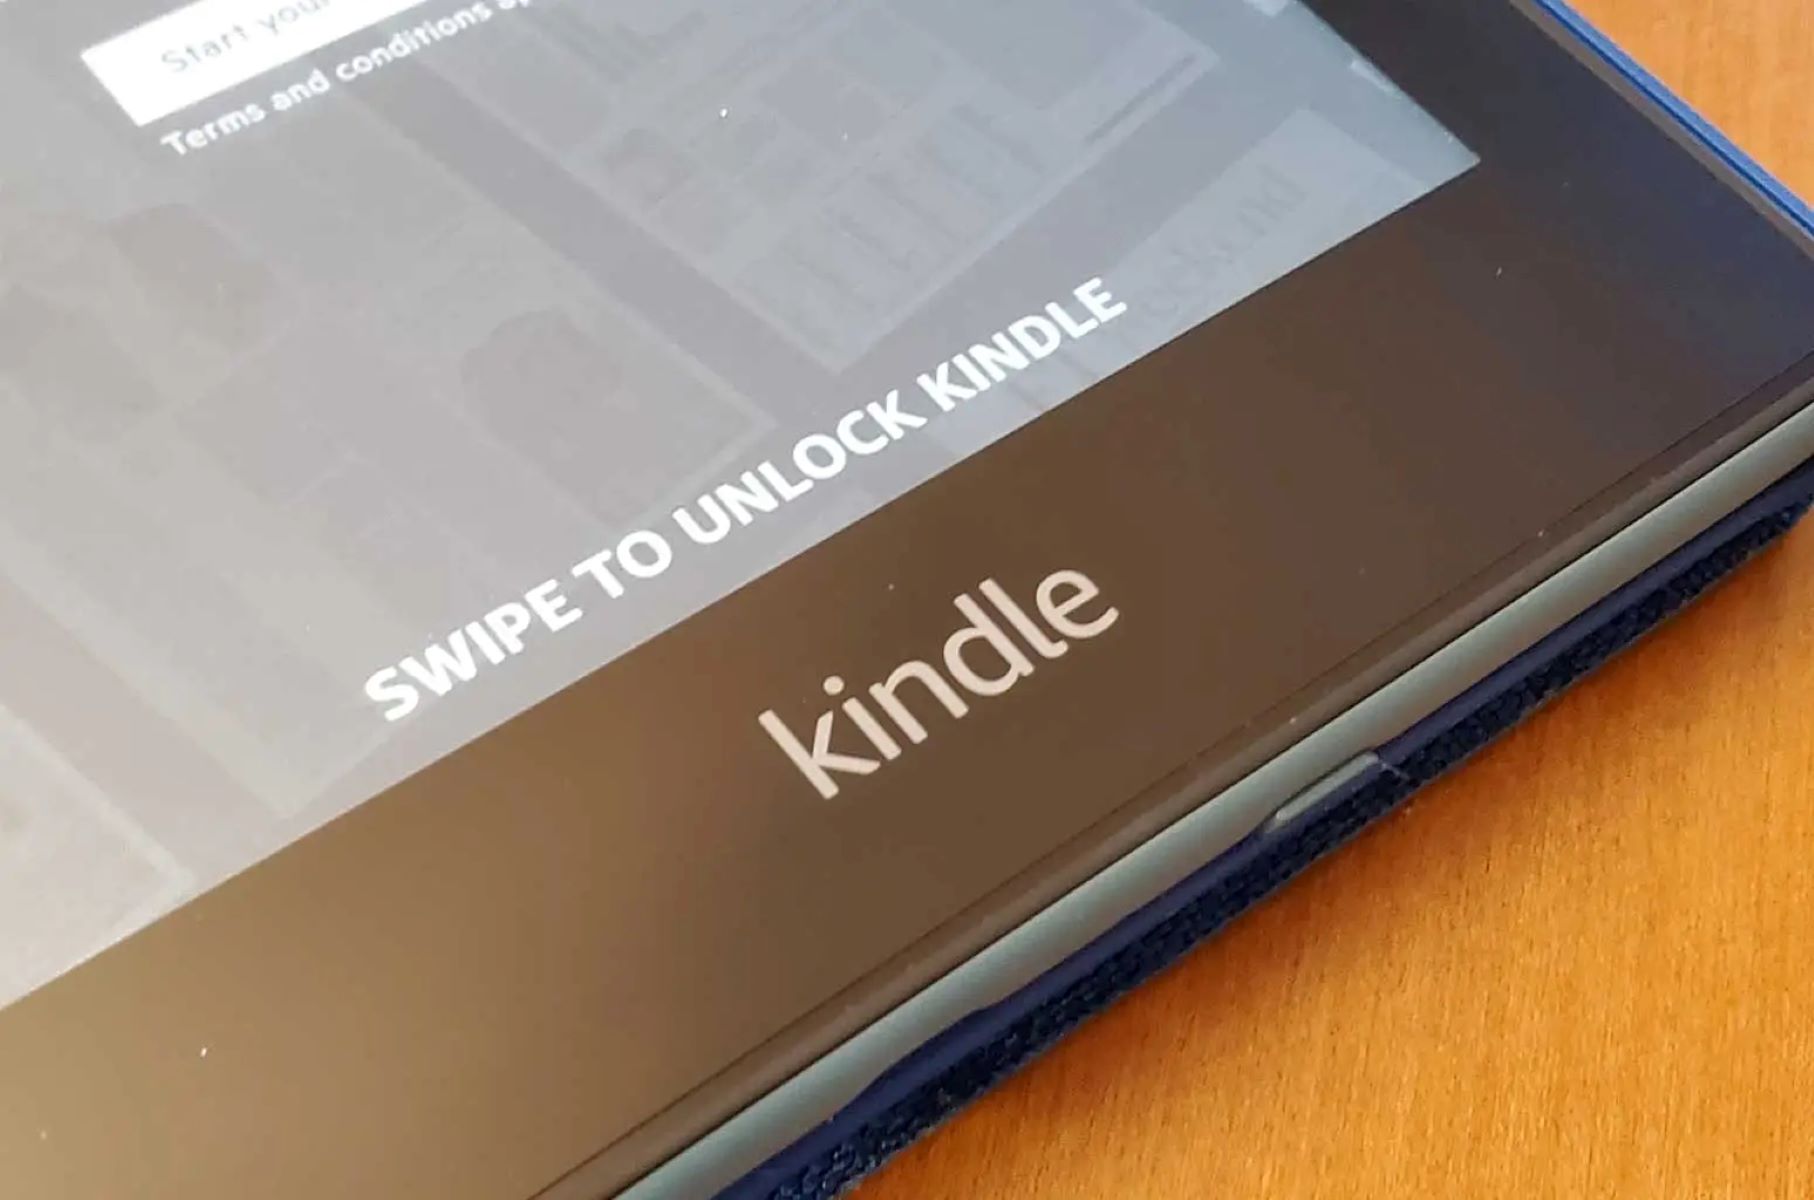 how to unlock a kindle without the password